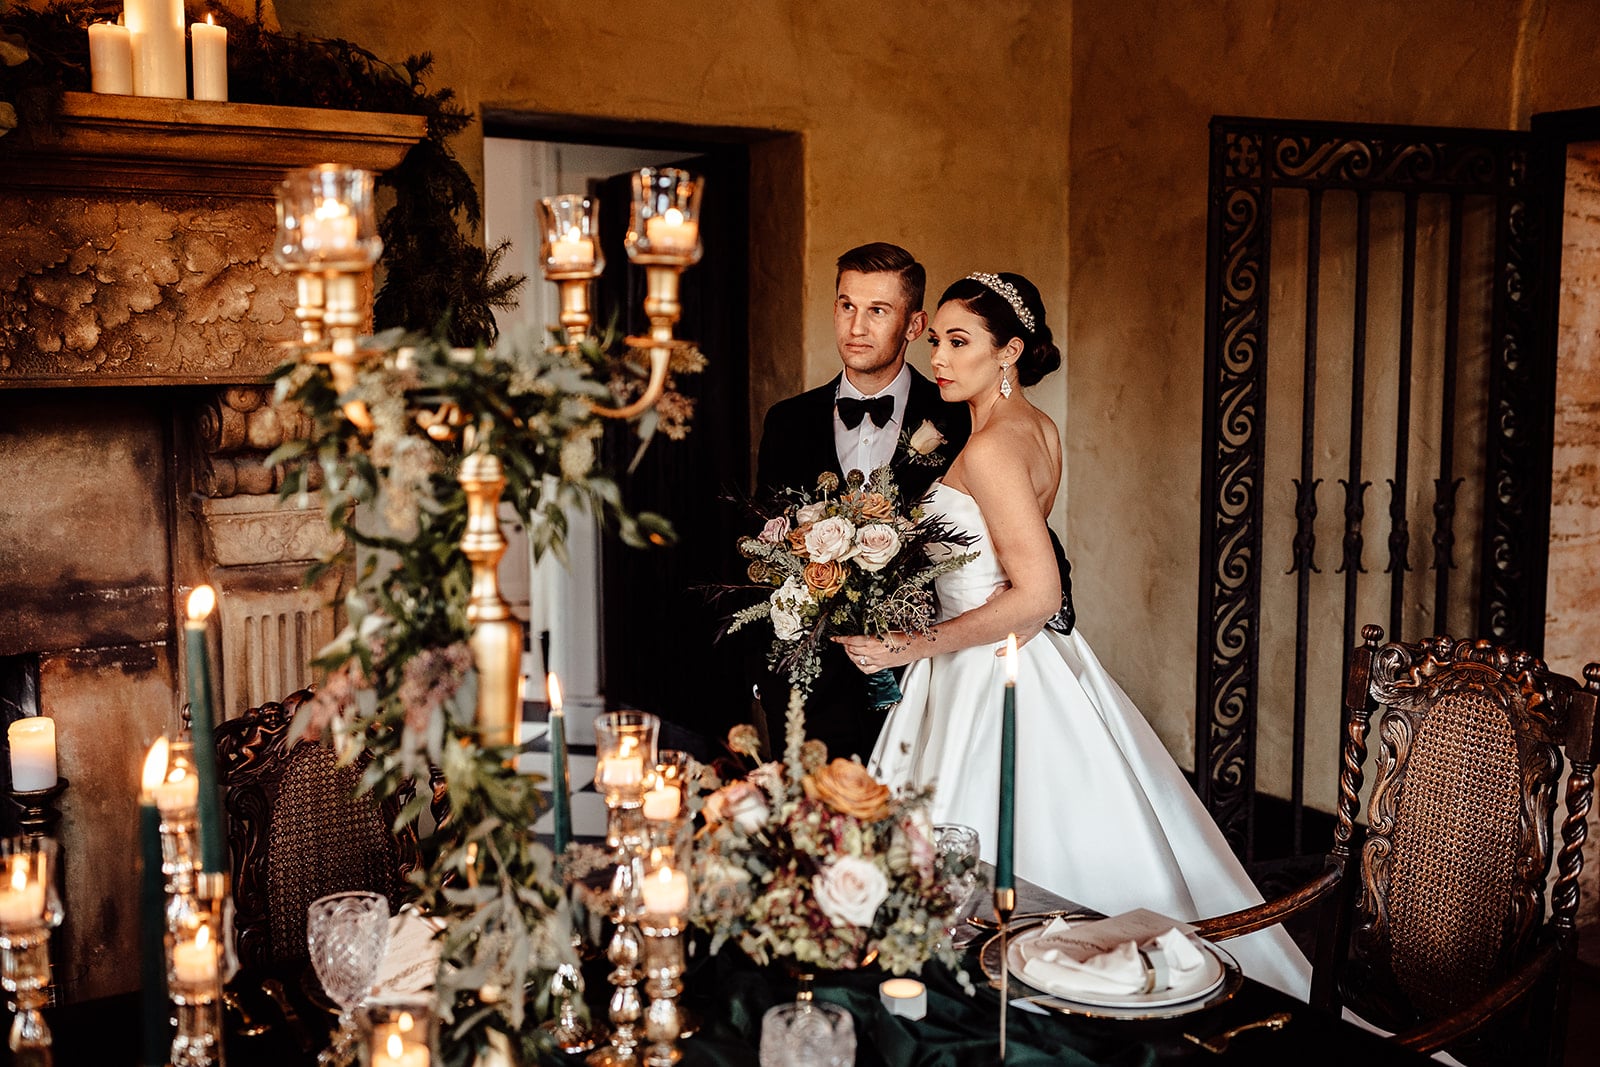 couple on wedding day stand close to each other looking off in the distance to the left in front of decorated table with candelabra and greenery